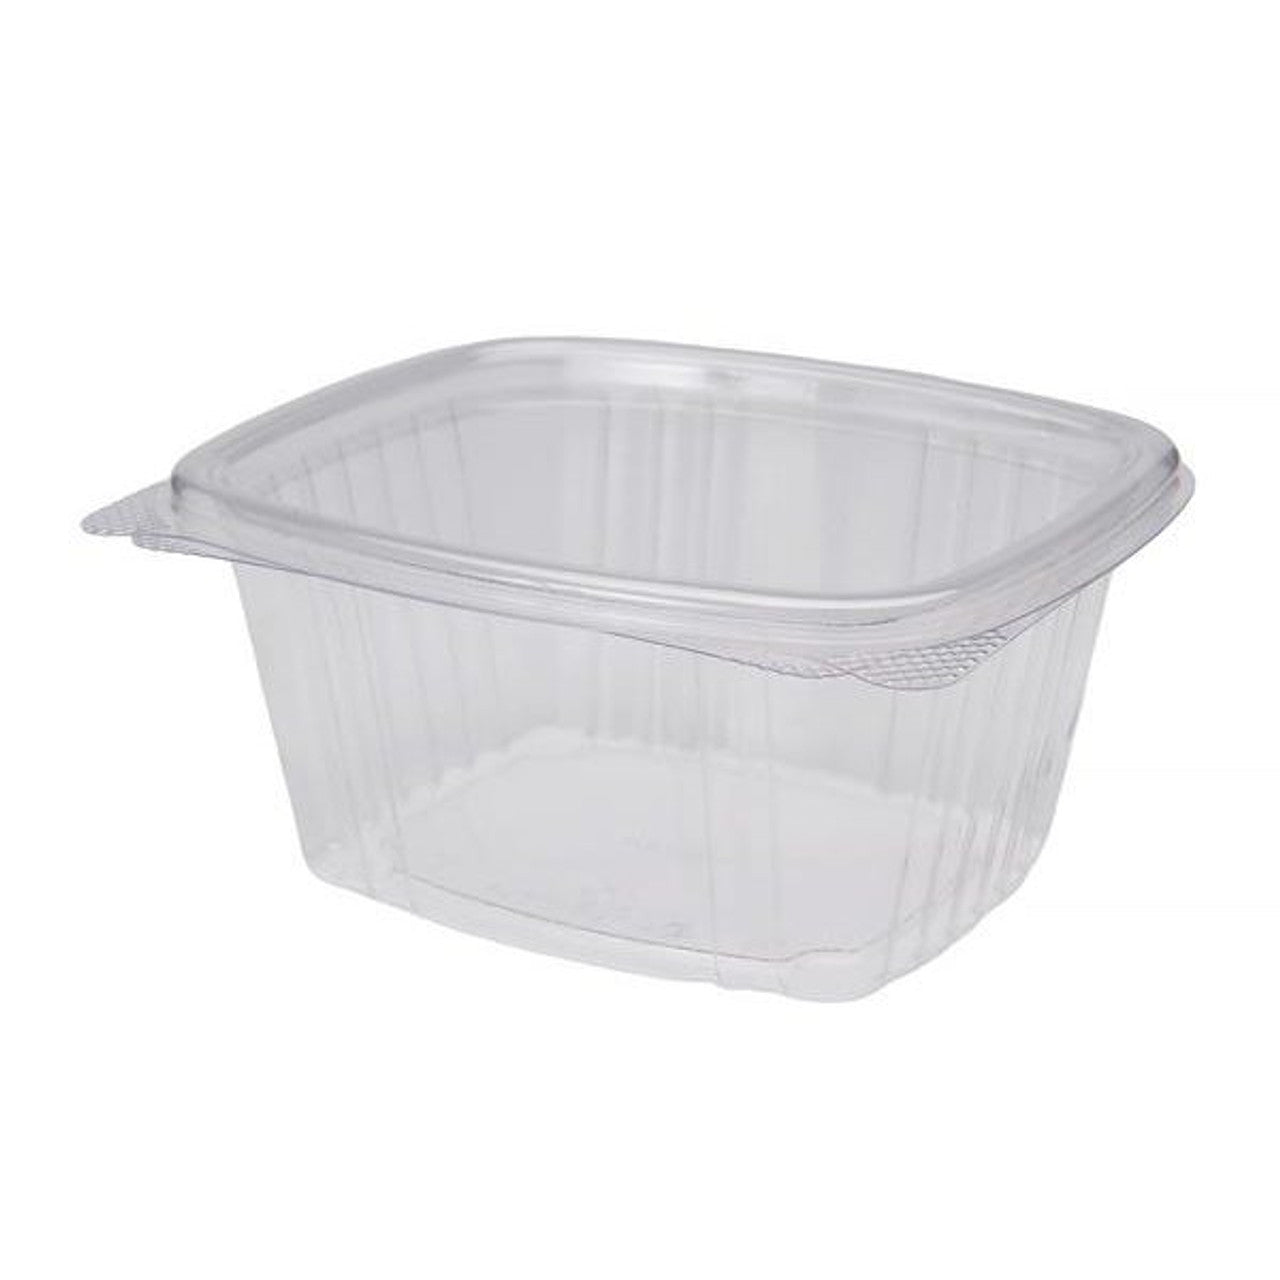 Hinged Deli Container - 16 Oz